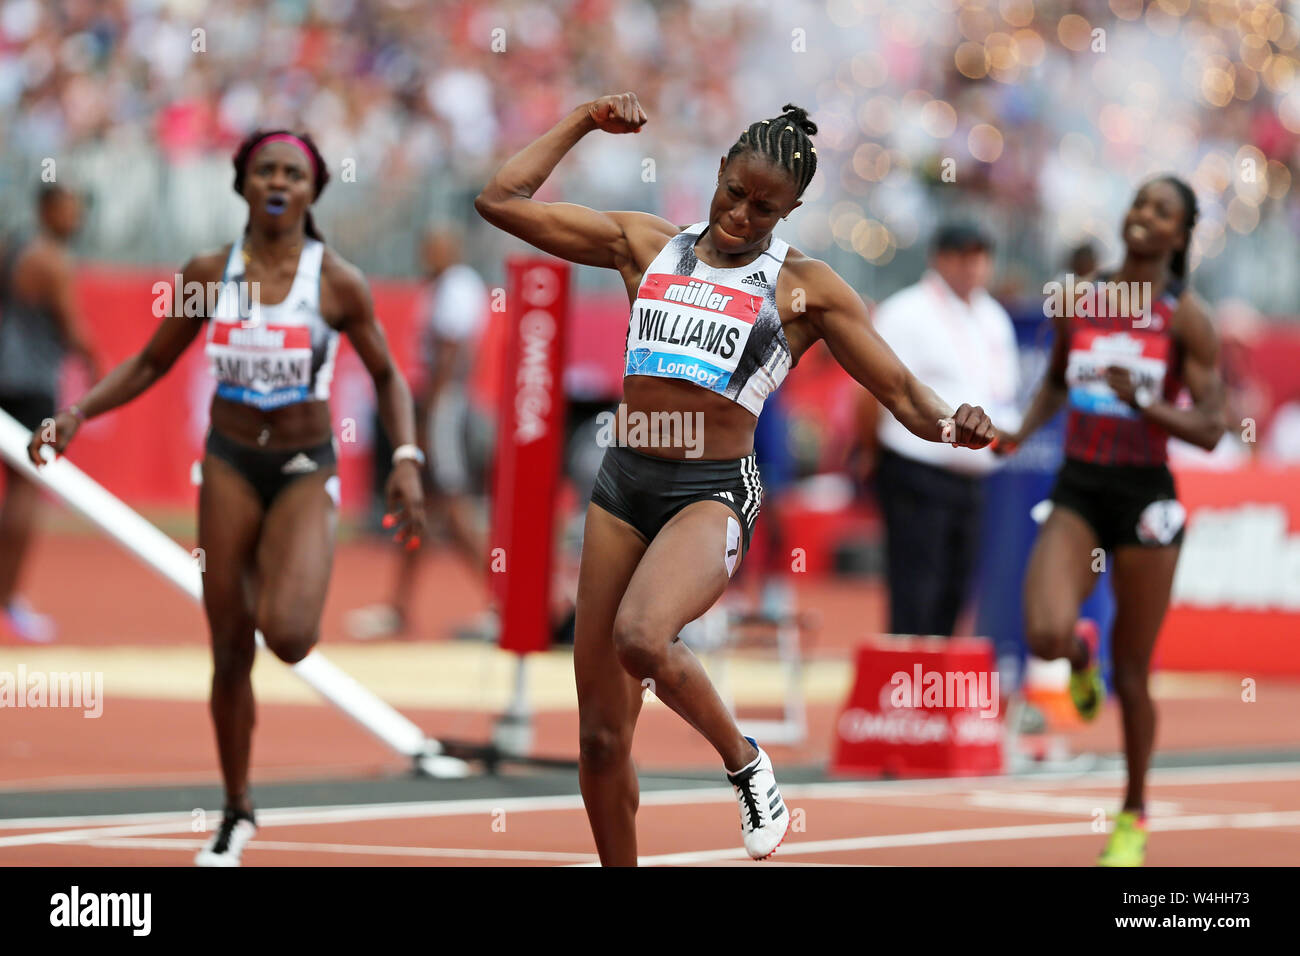 Danielle WILLIAMS (Jamaica) celebrating victory in the Women's 100m Hurdles Final at the 2019, IAAF Diamond League, Anniversary Games, Queen Elizabeth Olympic Park, Stratford, London, UK. Stock Photo